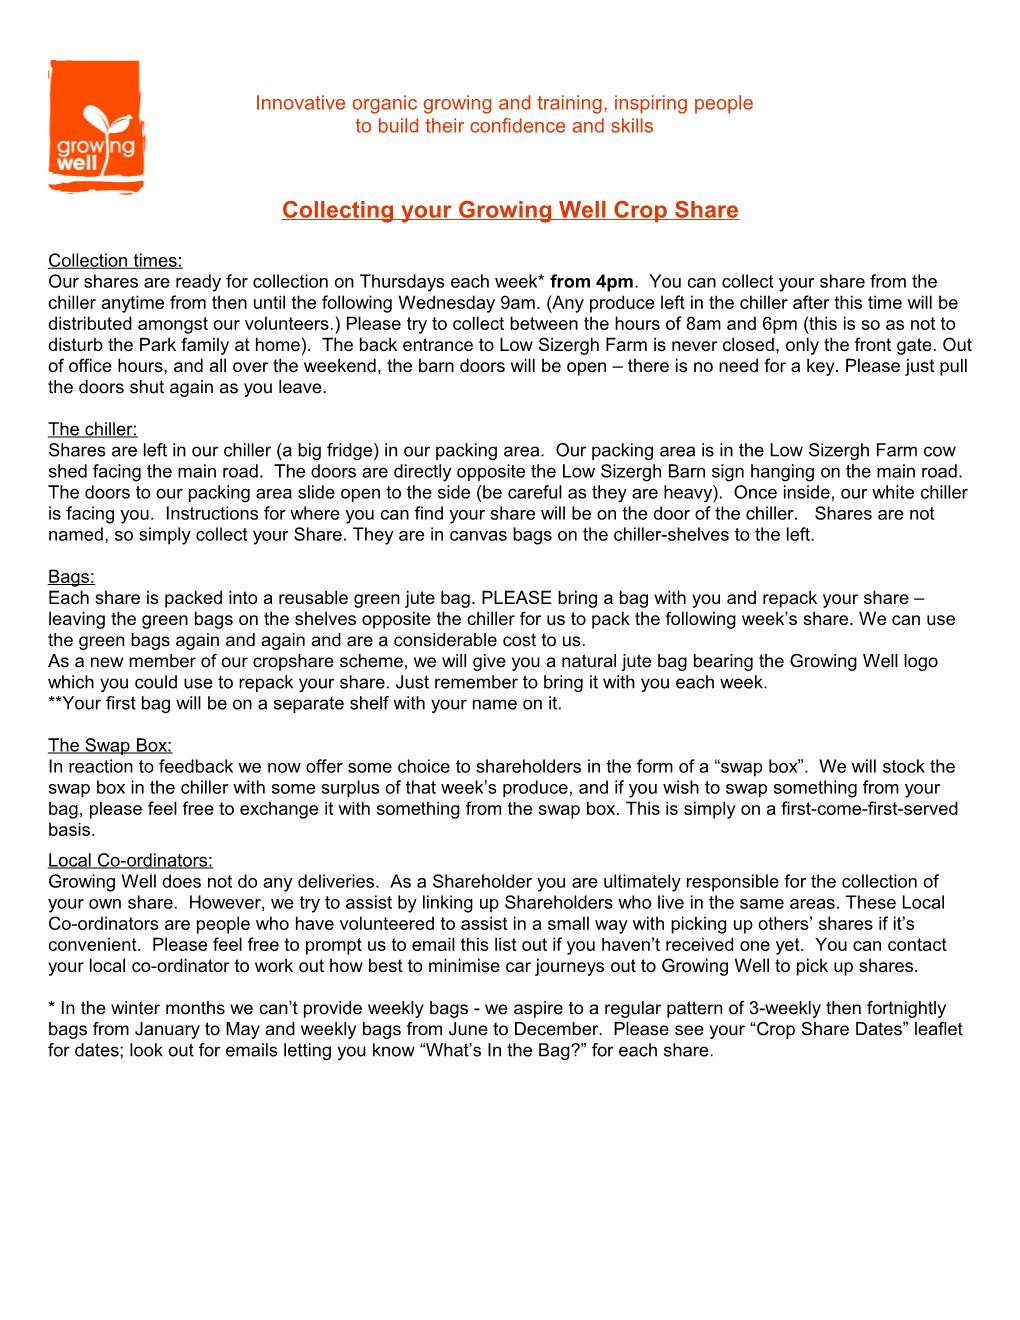 Collecting Your Growing Well Crop Share